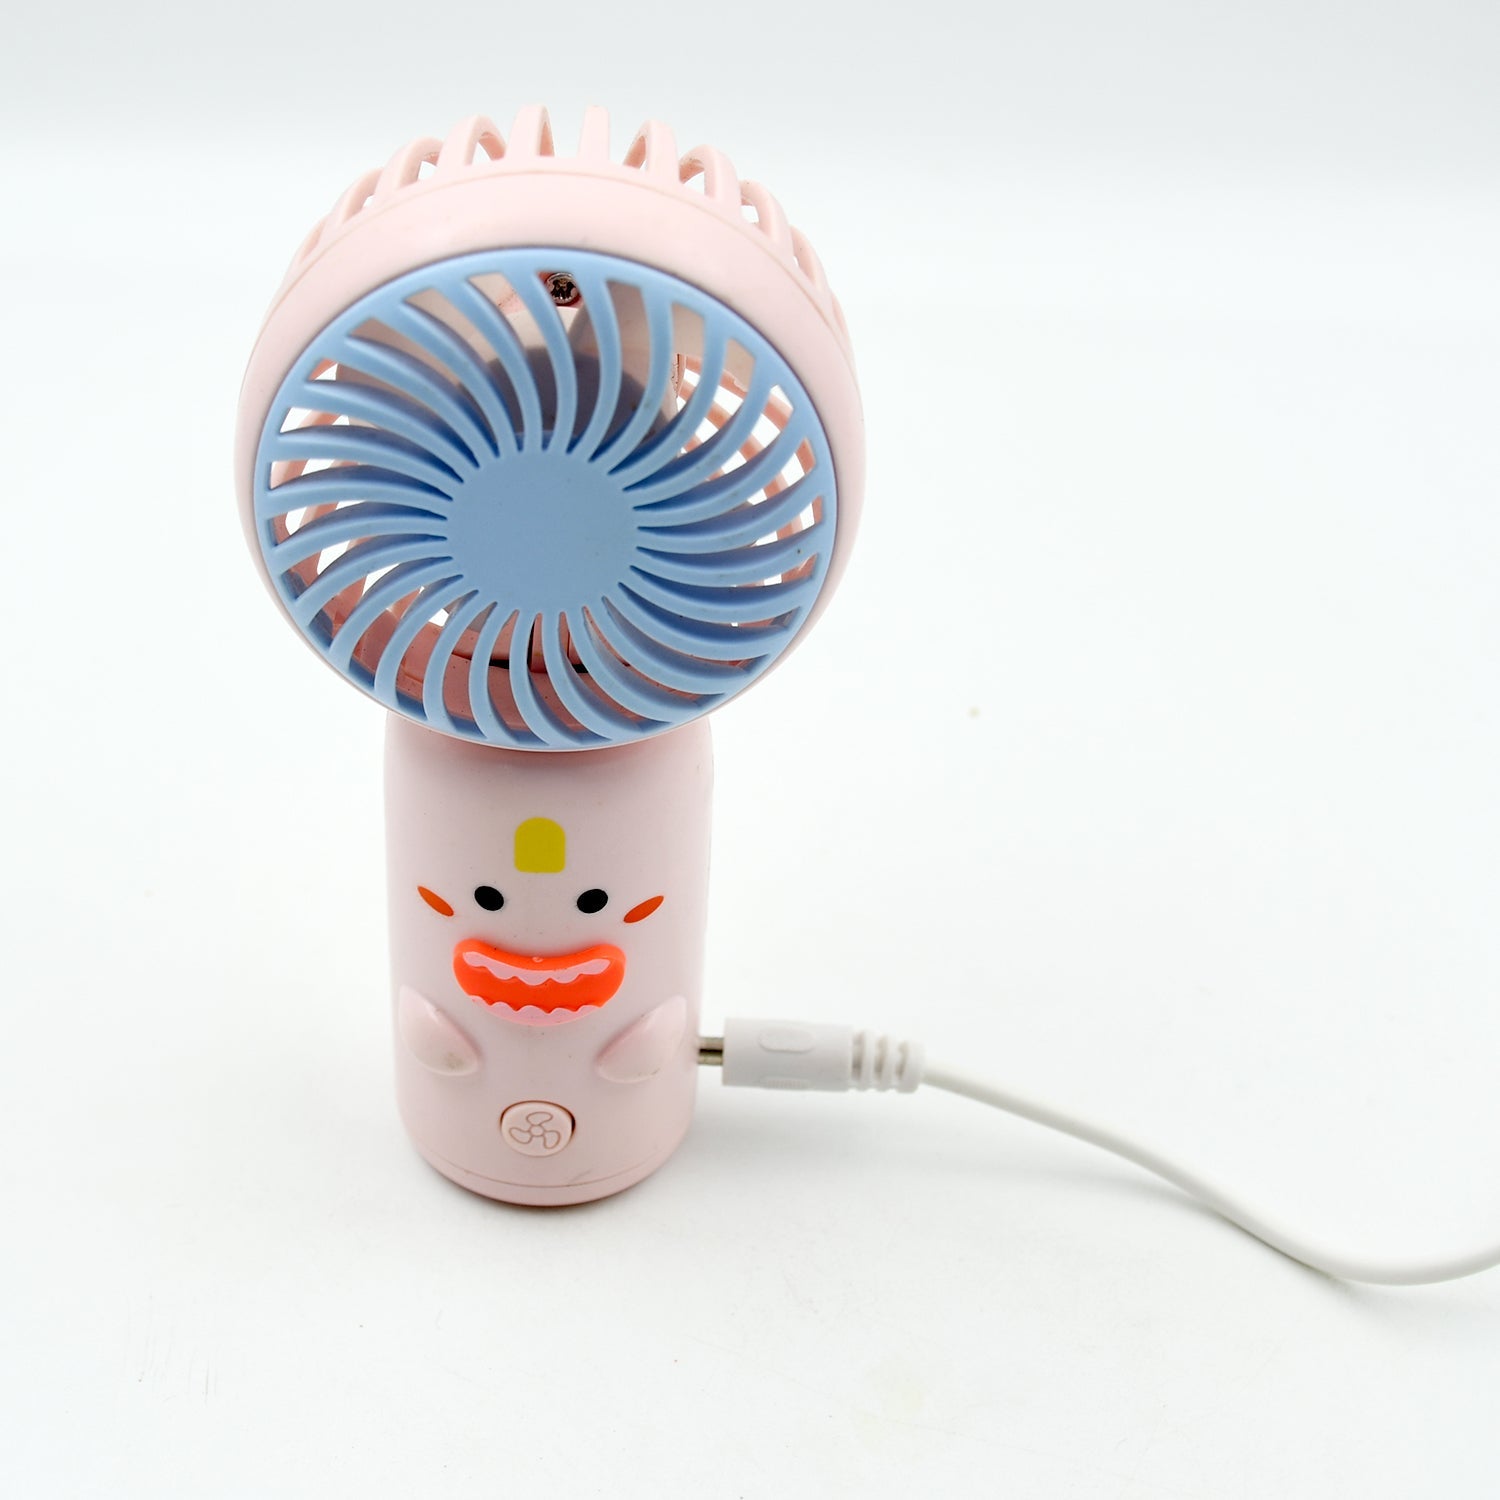 17703 Mini Handheld Fan, Portable Rechargeable Mini Fan for Home, Office, Travel and Outdoor Use (1 Pc)